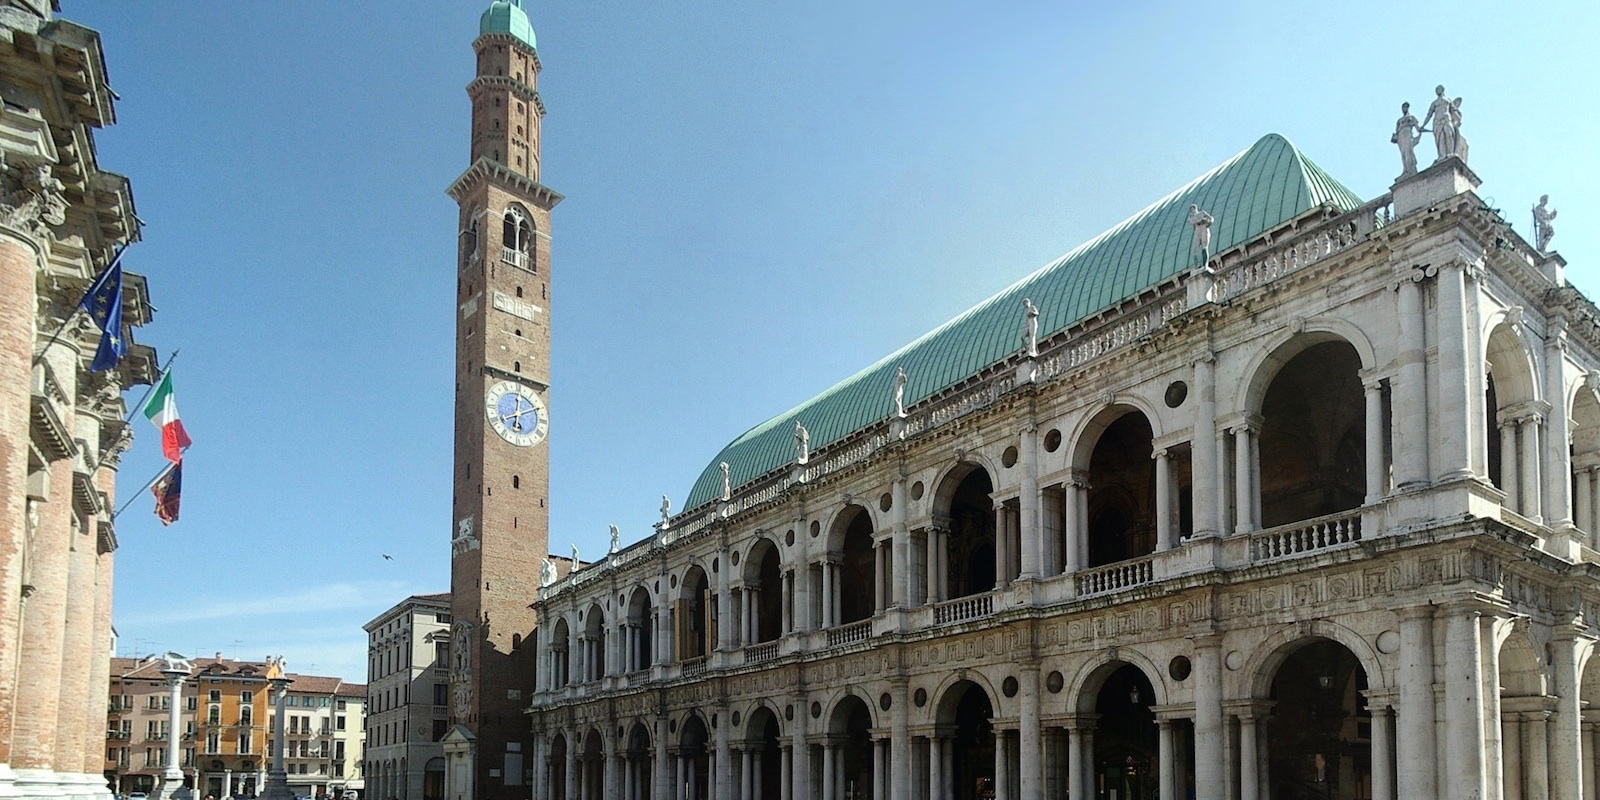 Vicenza's guide